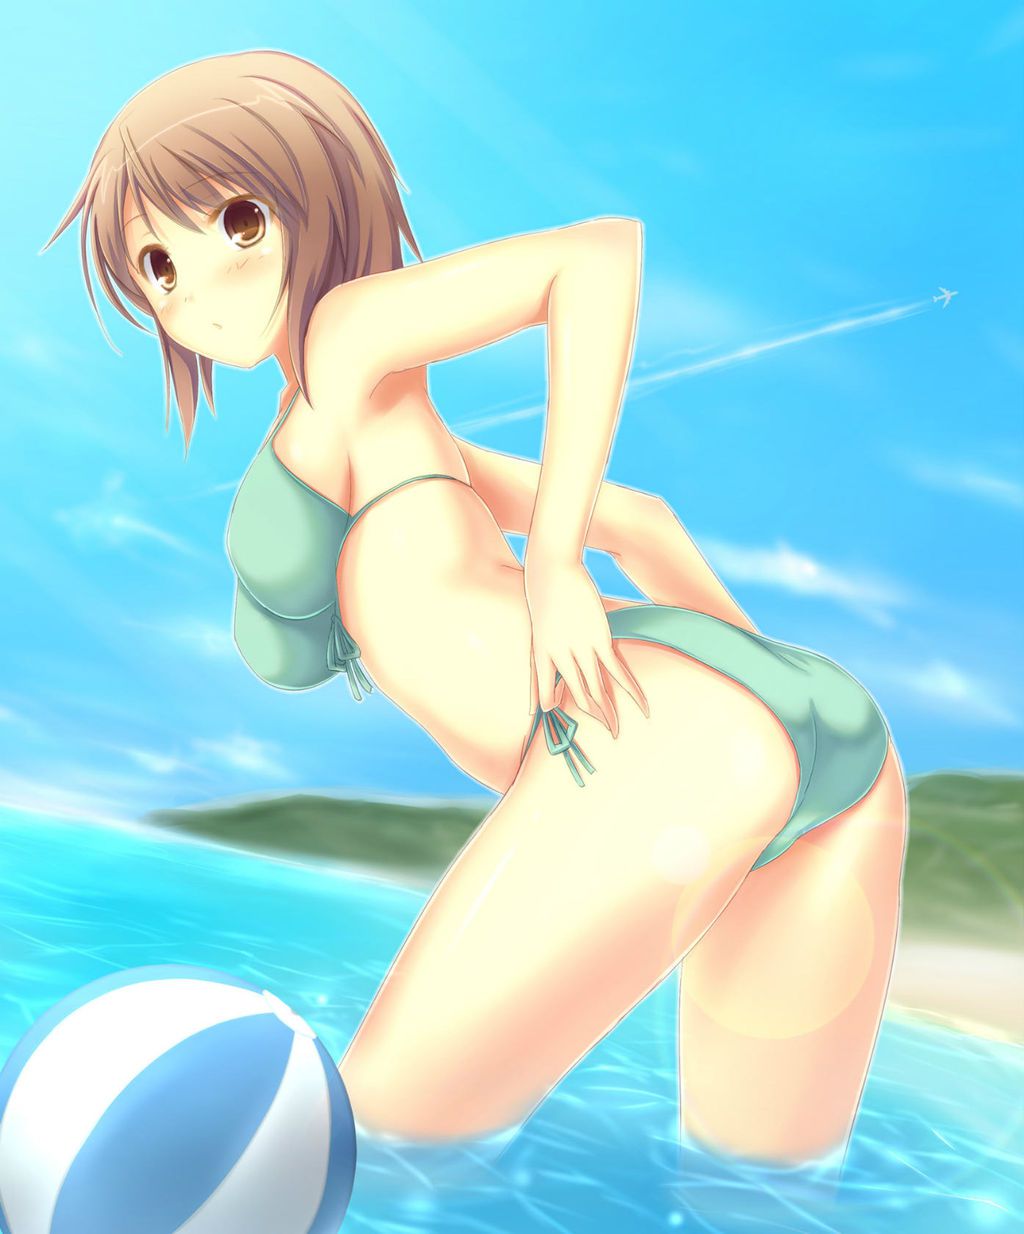 [Swimsuit] can't wait until summer vacation! I want to see a swimsuit and a bikini girl! Part 5 [2-d] 44